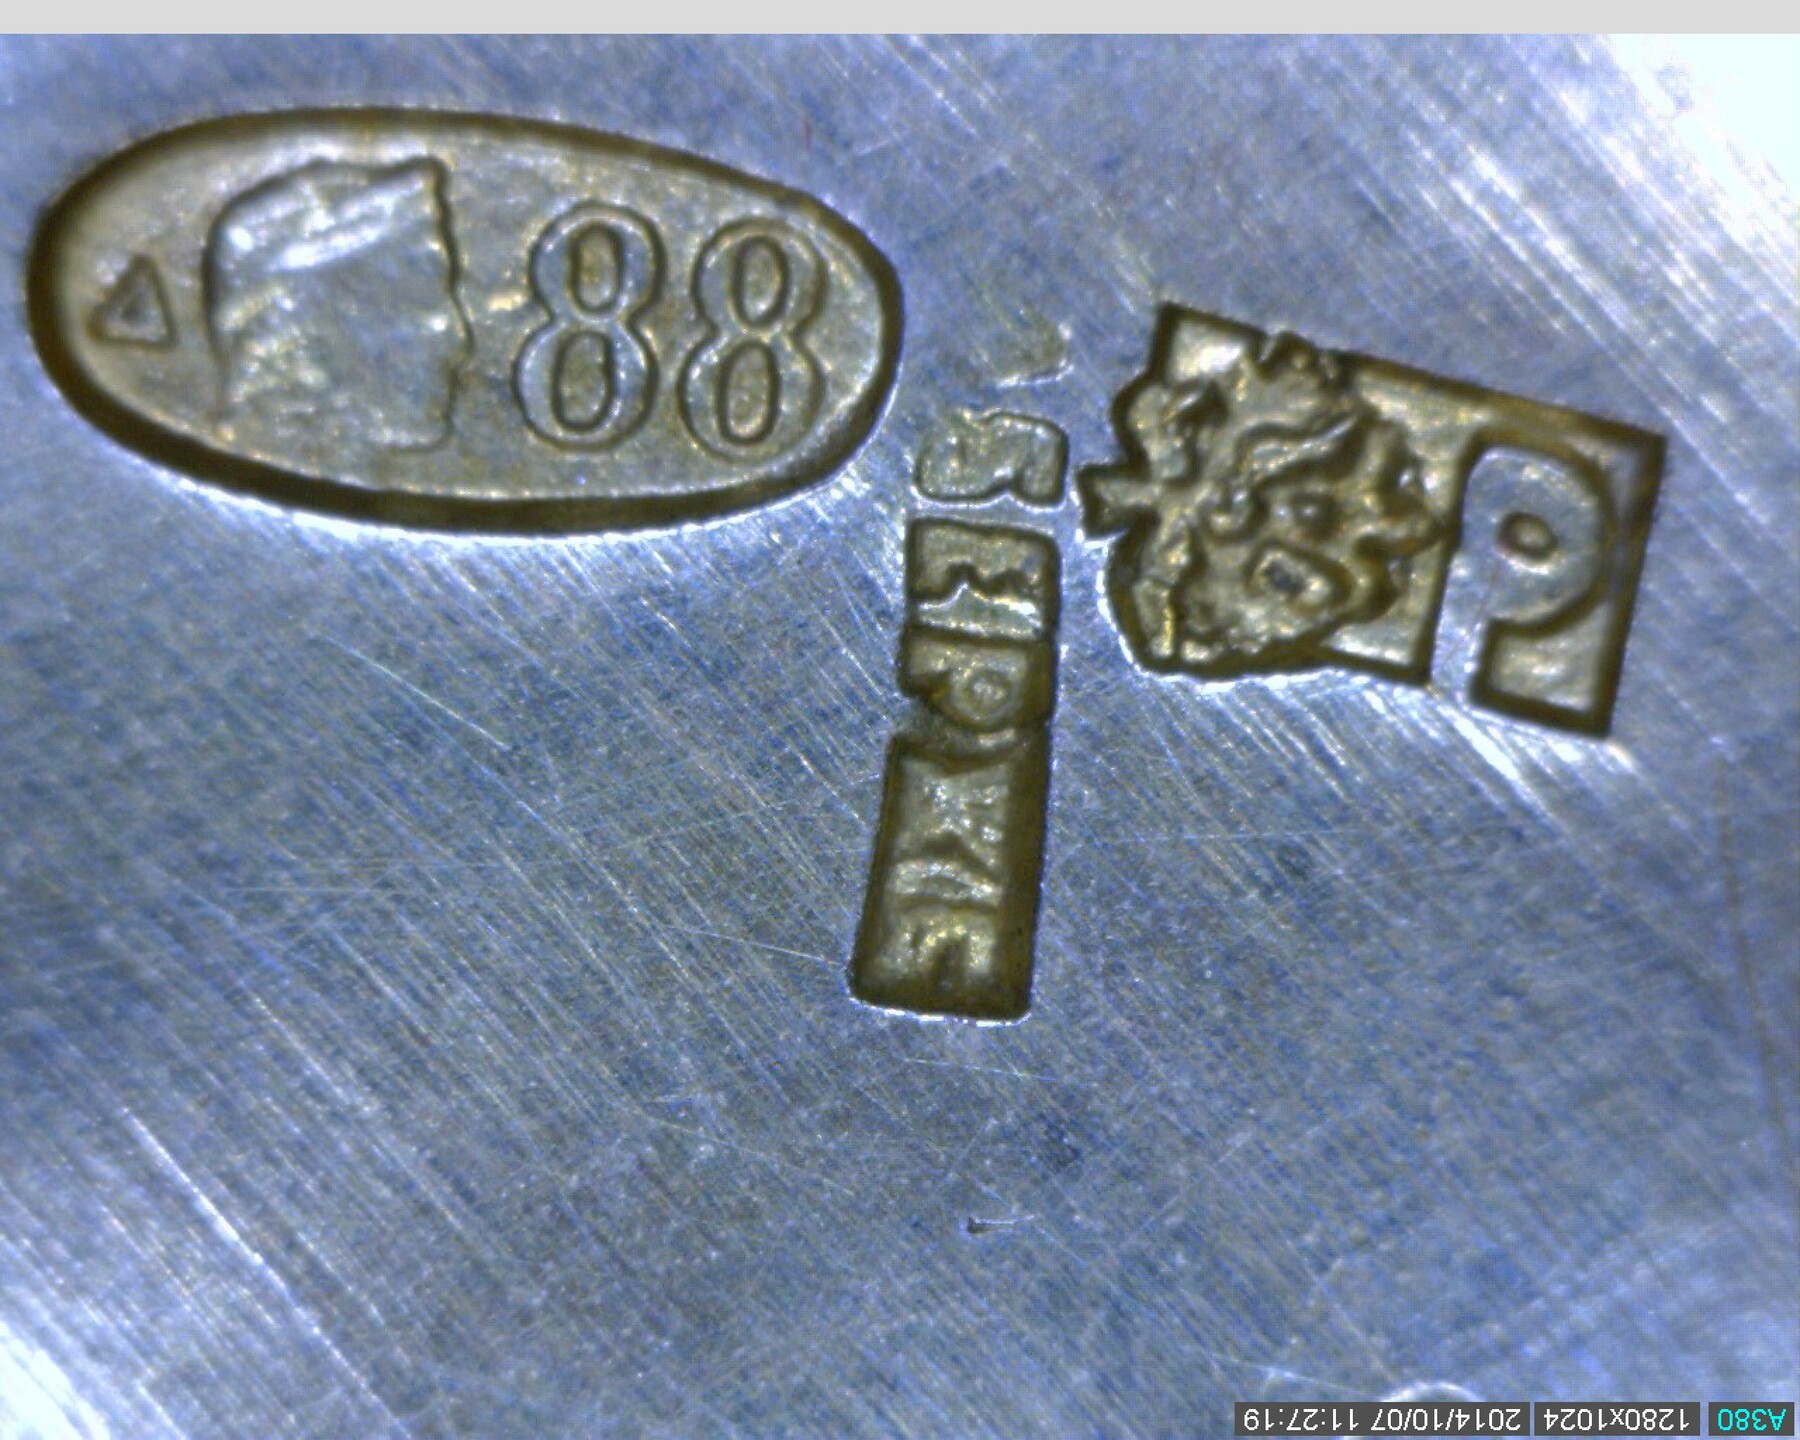 MARK OF FABERGÉ IN CYRILLIC BENEATH THE IMPERIAL WARRANT, MAKER’S MARK OF FEODOR RÜCKERT IN CYRILLIC, MOSCOW, 88 STANDARD, 1908–1917